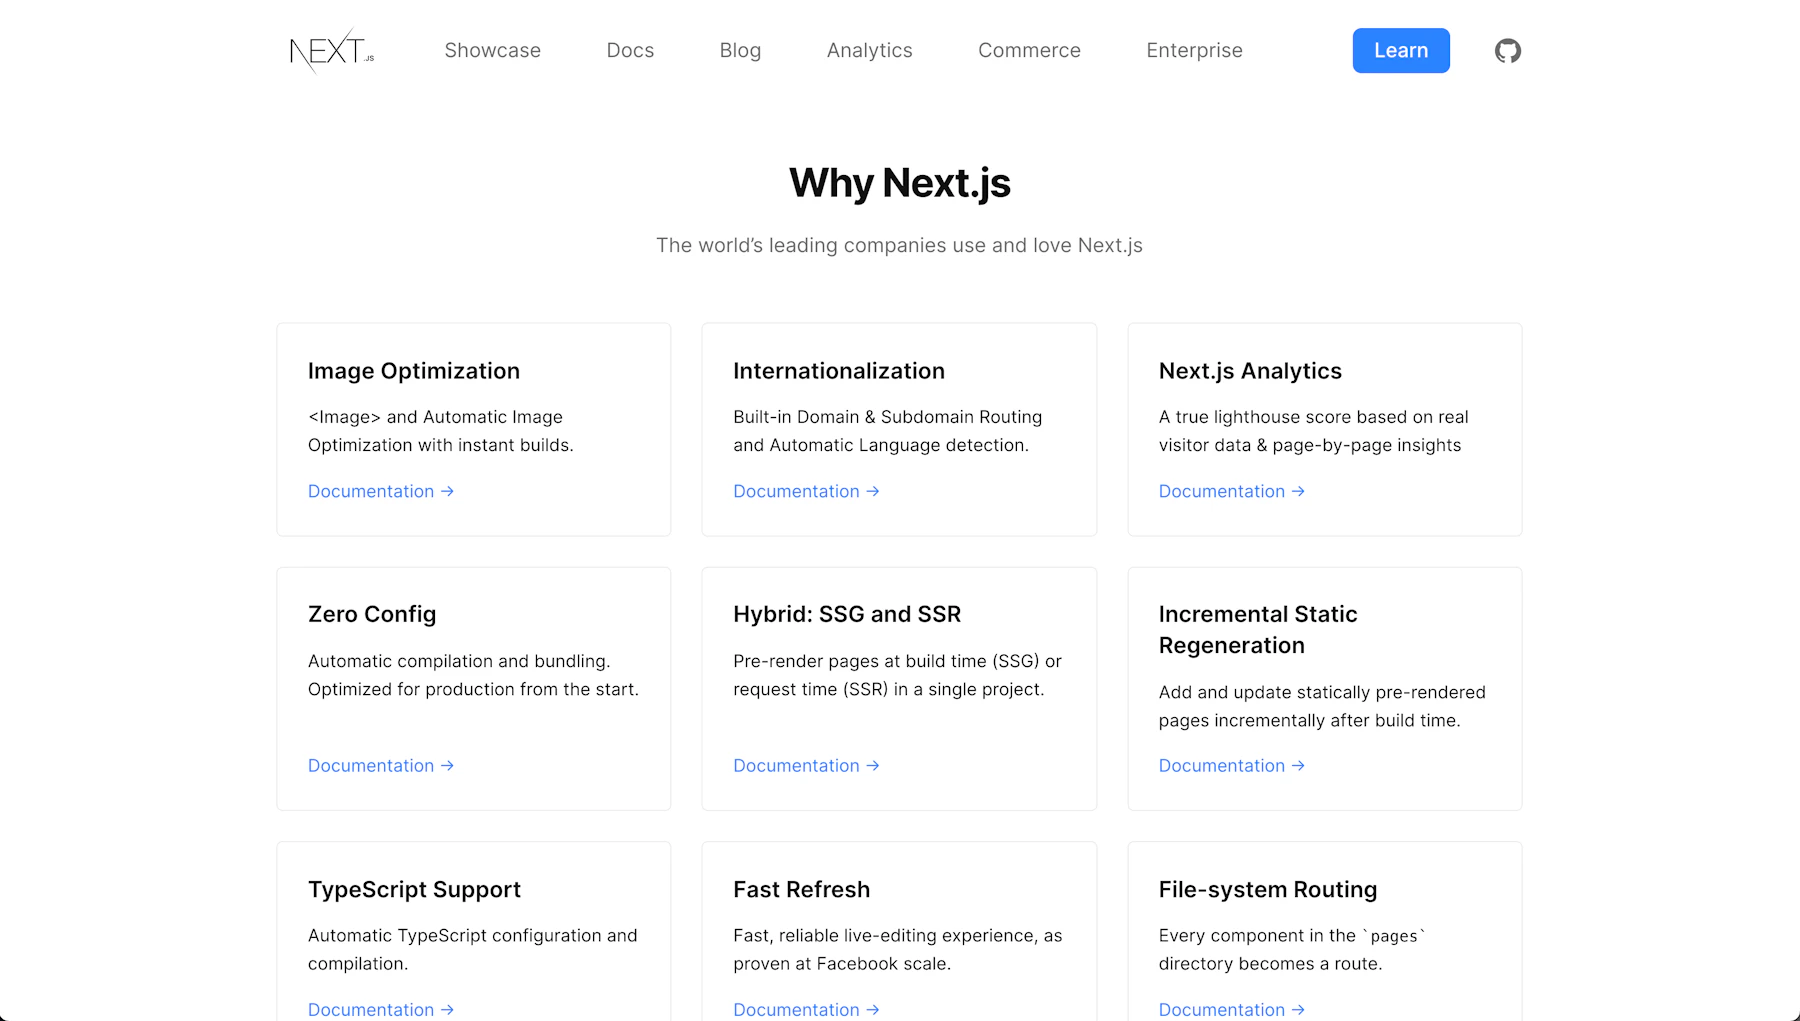 Next.js homepage features list